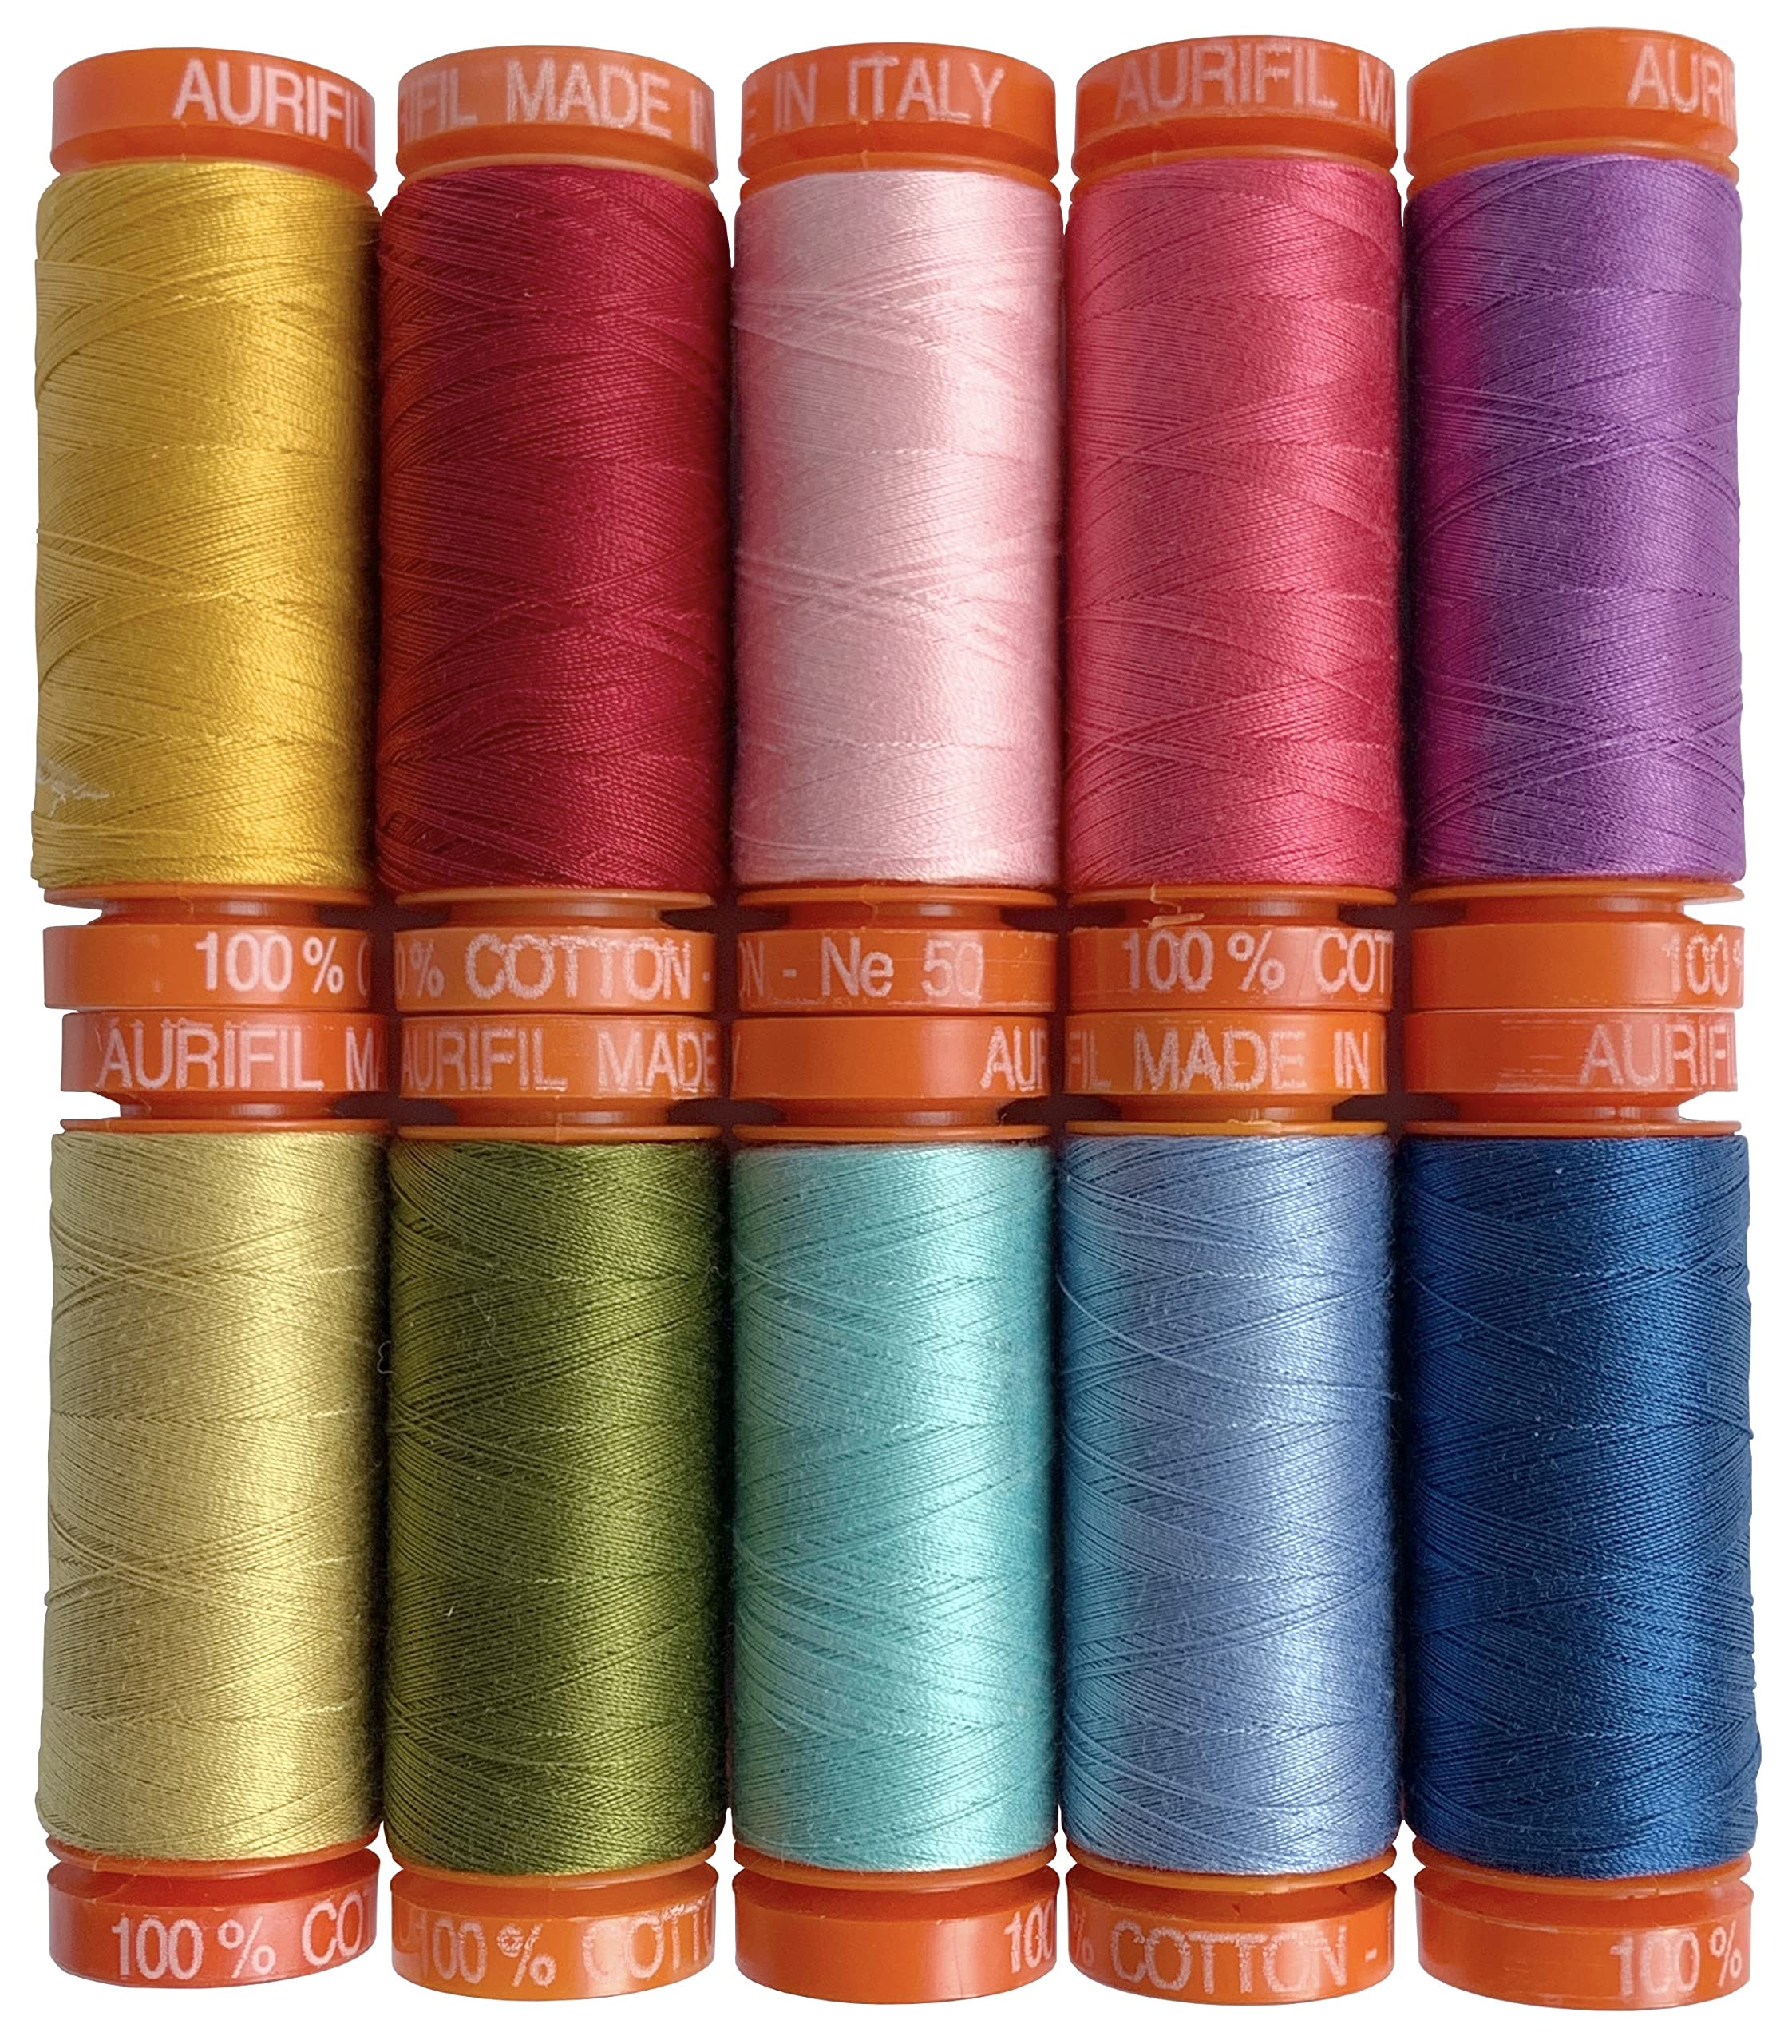 AURIFIL USA Thread Collection CO, The Perfect Box of Colors by Pat Sloan